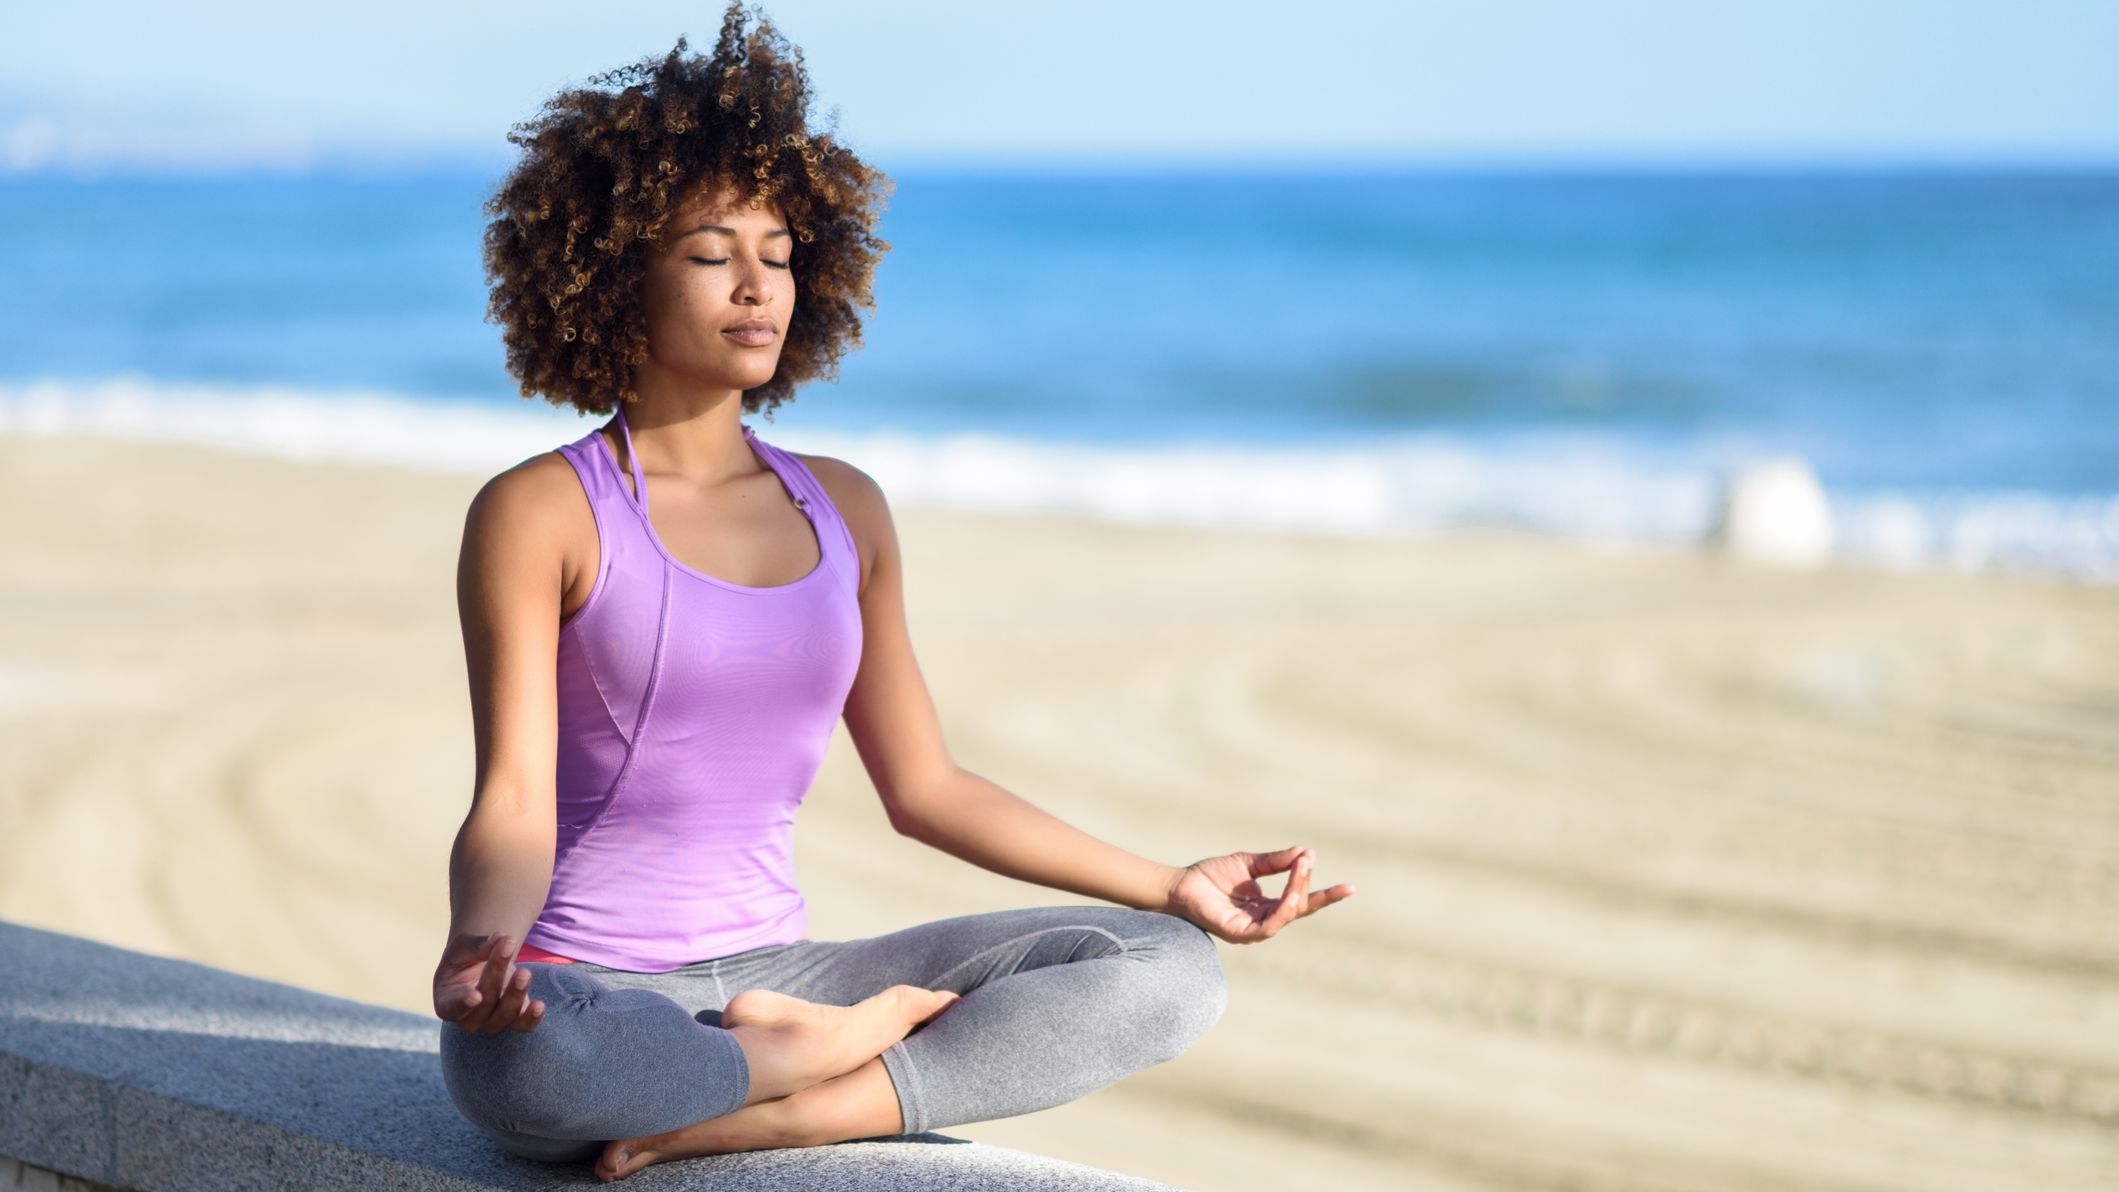 Mindfulness Improves Well-Being – The Unsurpassable Experience